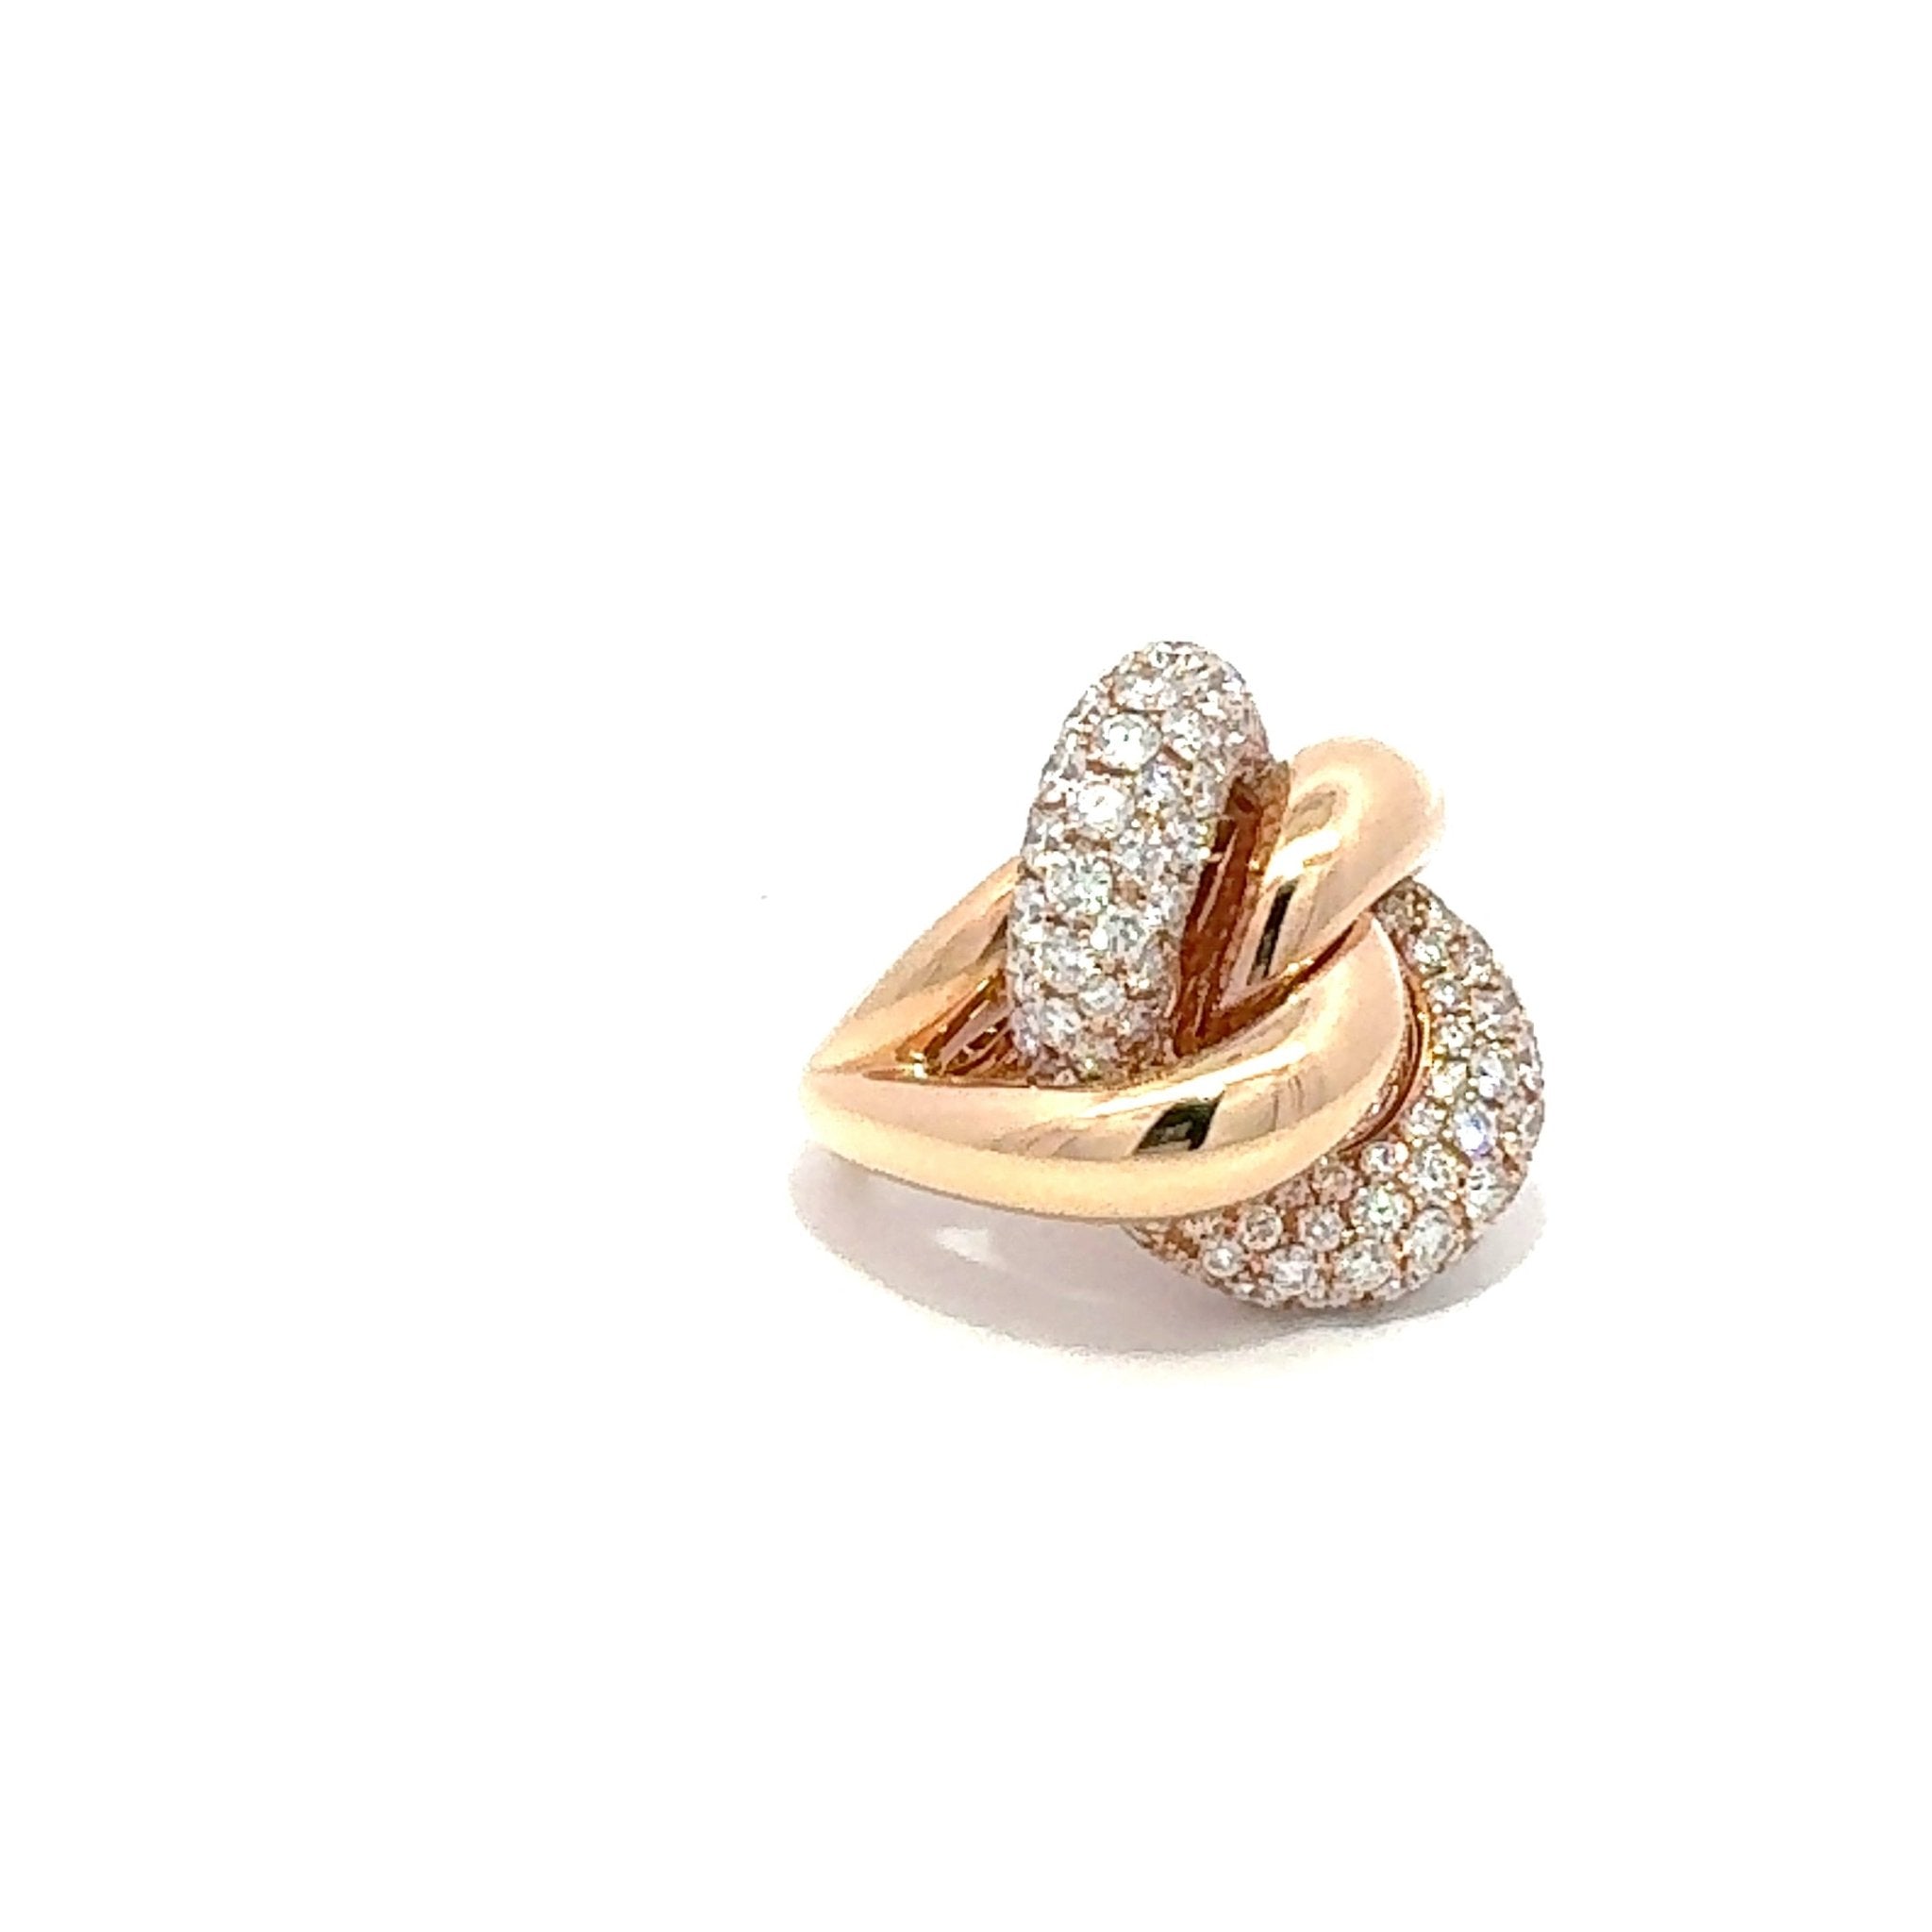 Chain Style Diamond 18K Yellow Gold Exclusive Ring by Natkina